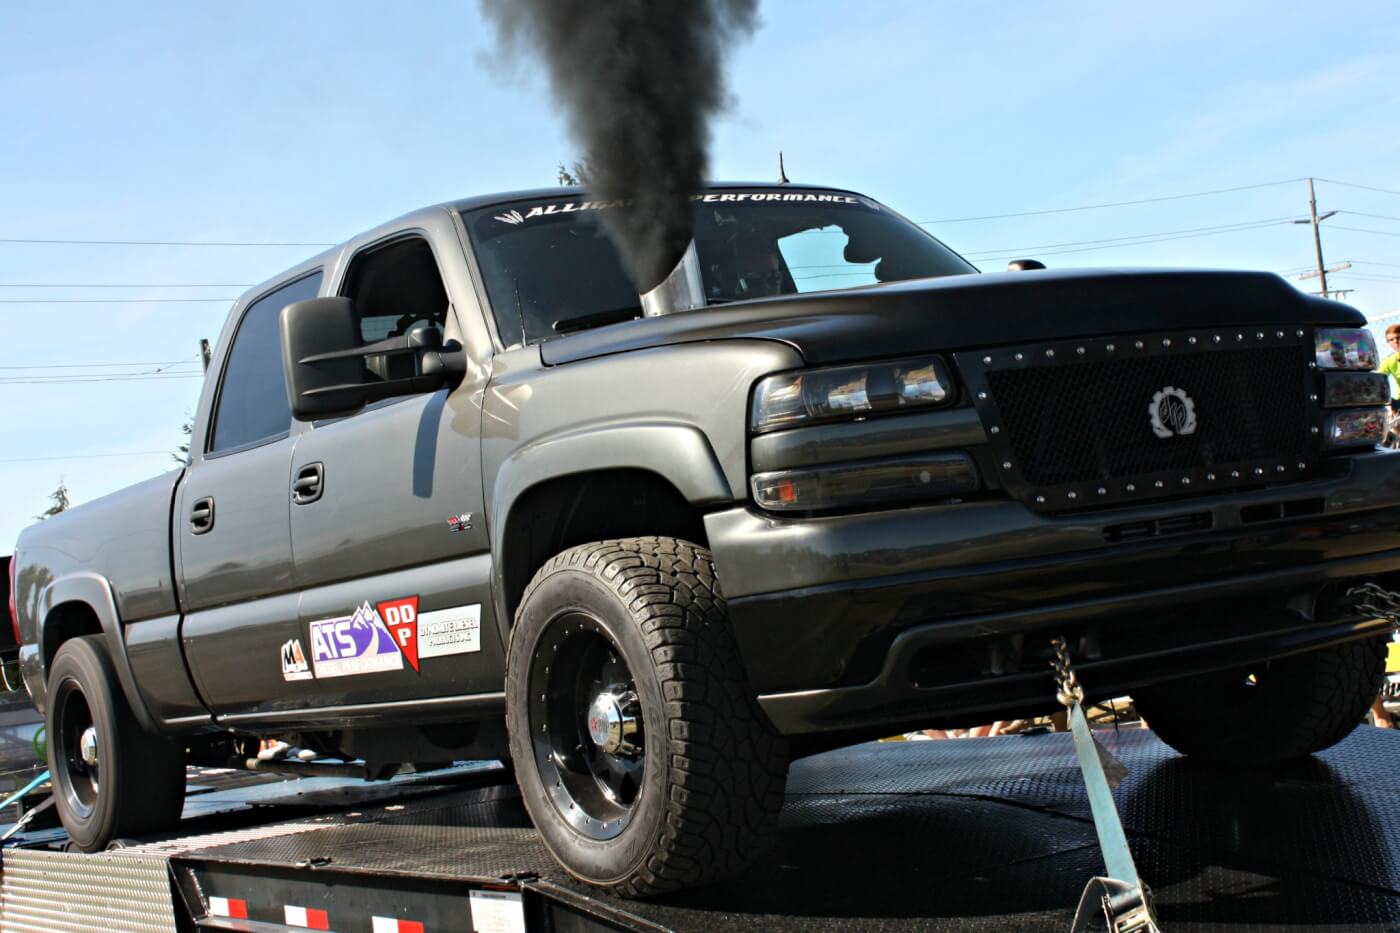 Lead fabricator at Deviant Race Parts, Chris Rosscup, owns this sporty LB7 Duramax with countless hours and hard work into a full engine and transmission build that ended up rolling over 1,000 hp on the Auto Trends Motorsports portable chassis dyno.